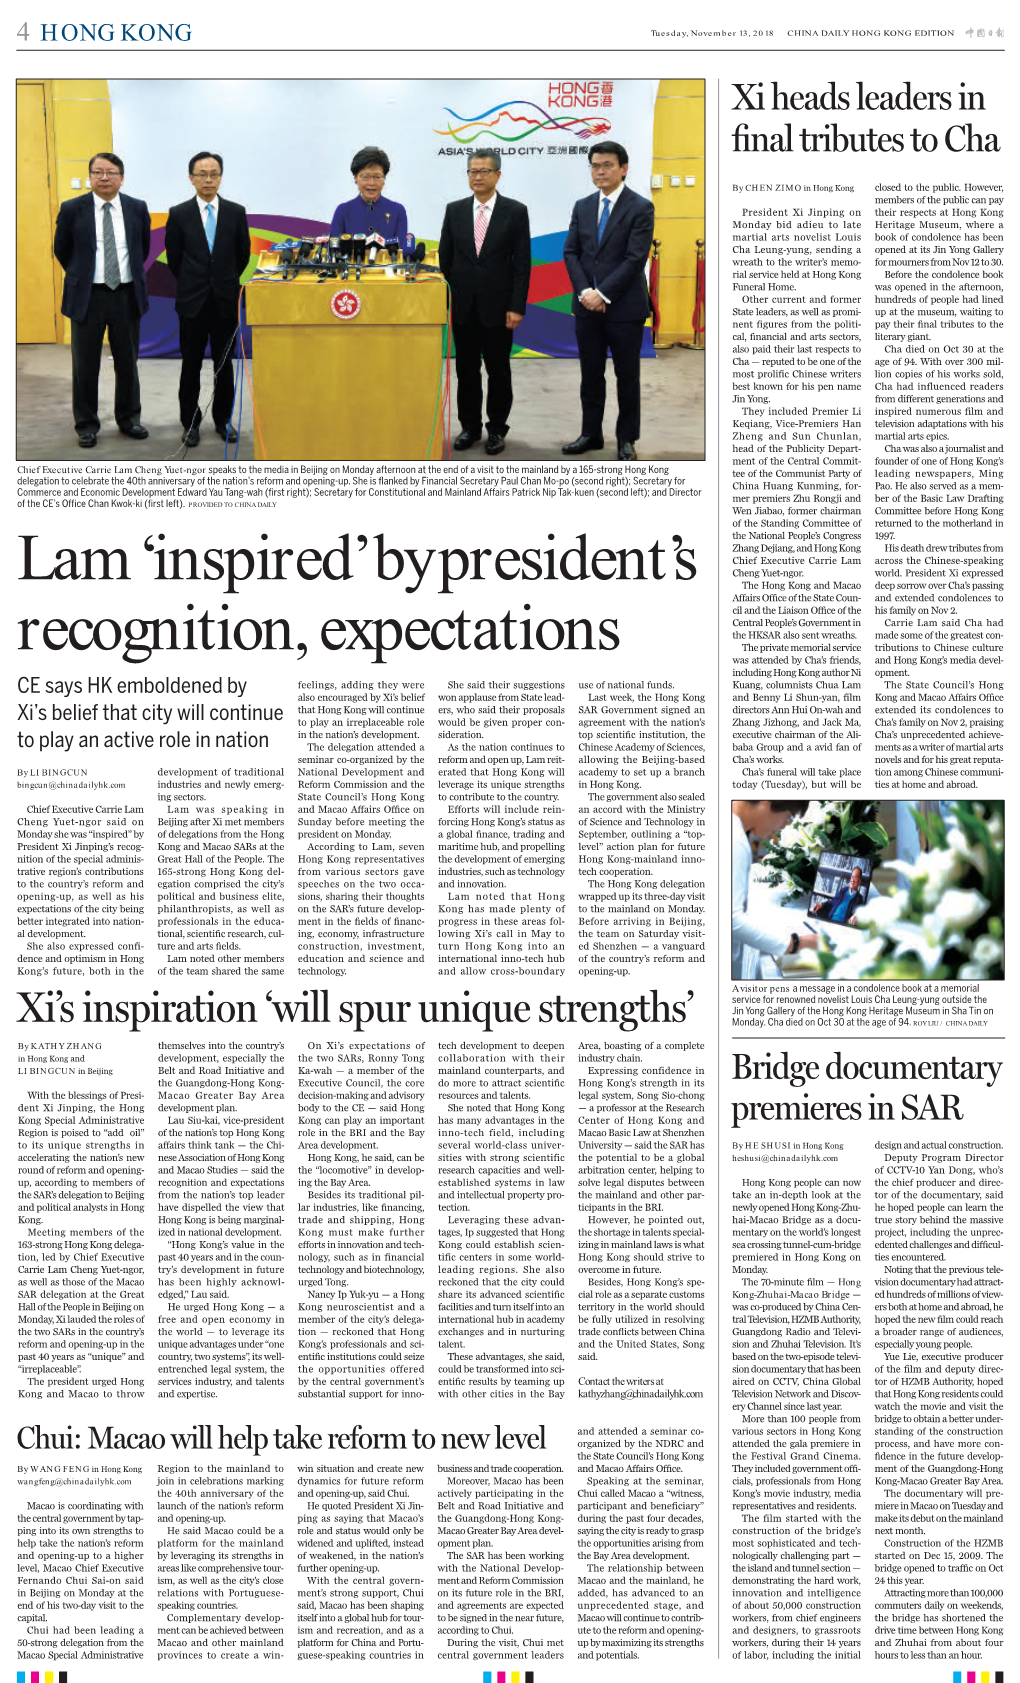 Lam 'Inspired' by President's Recognition, Expectations